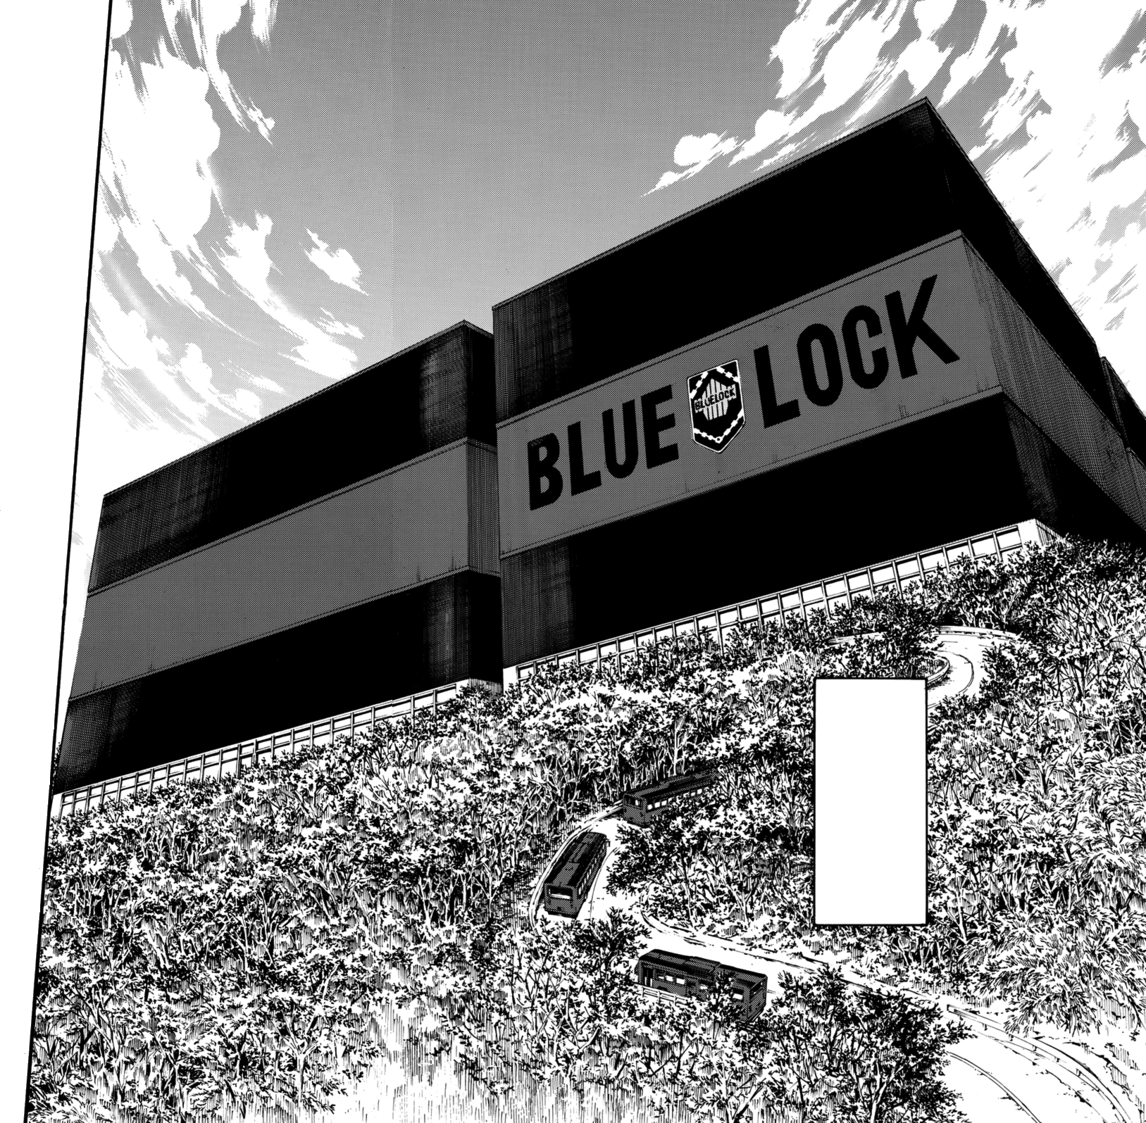 Blue Lock: The Blue Lock project, explained